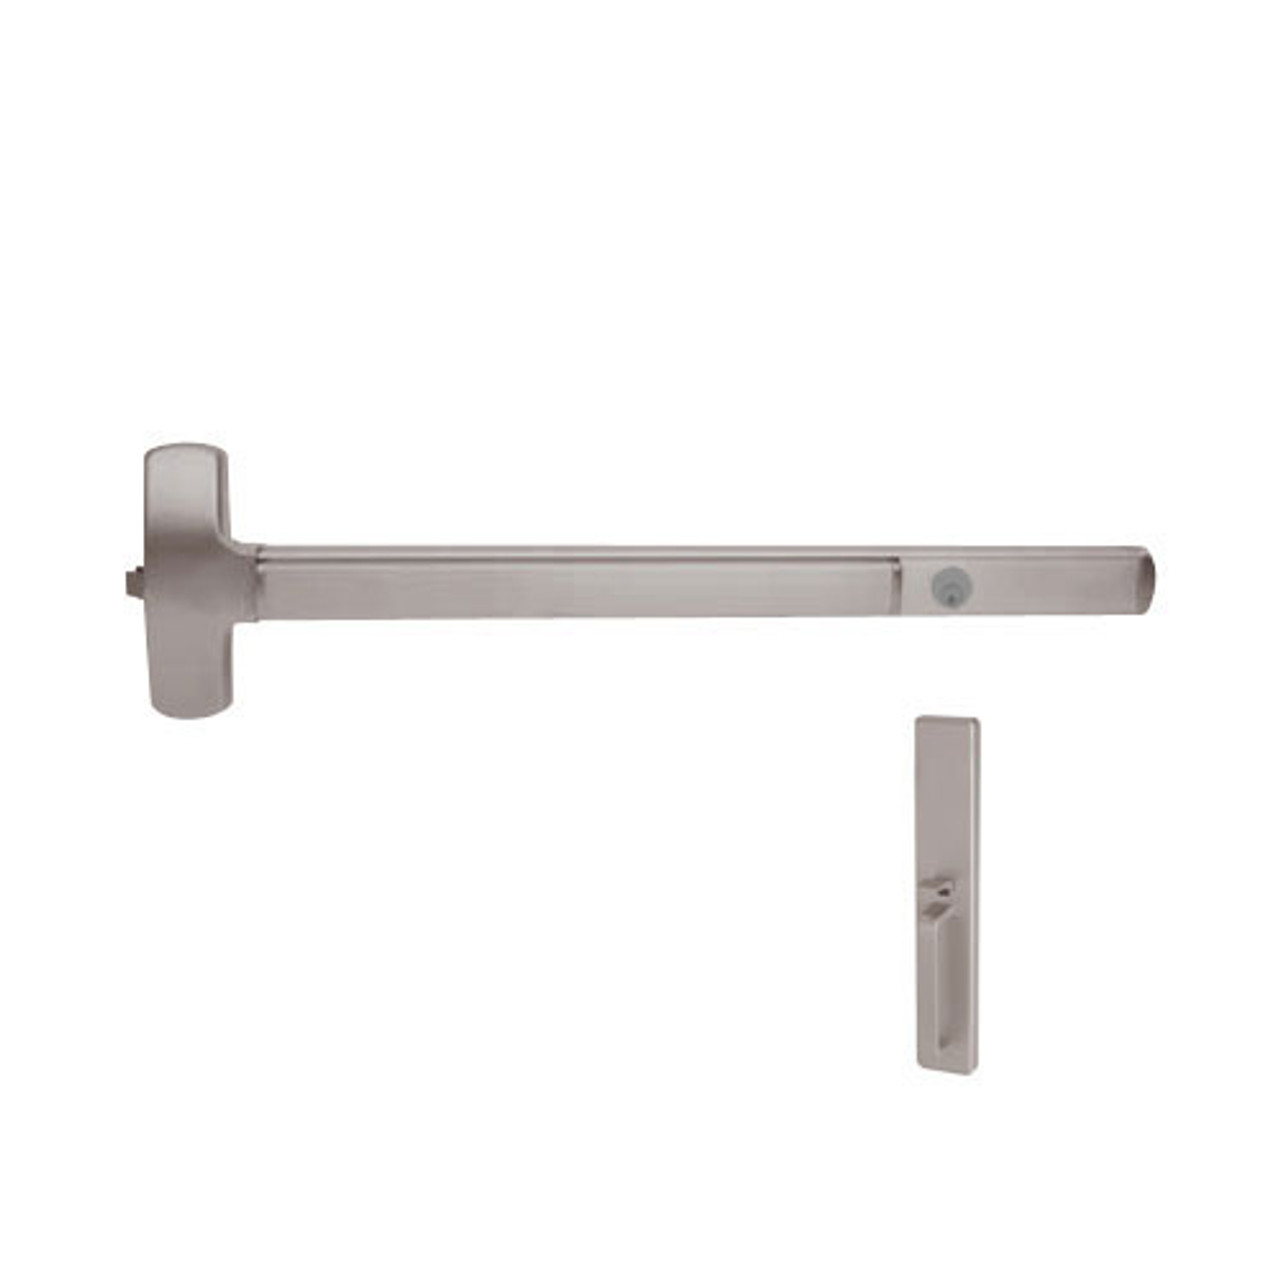 CD25-R-TP-BE-US28-4 Falcon Exit Device in Anodized Aluminum